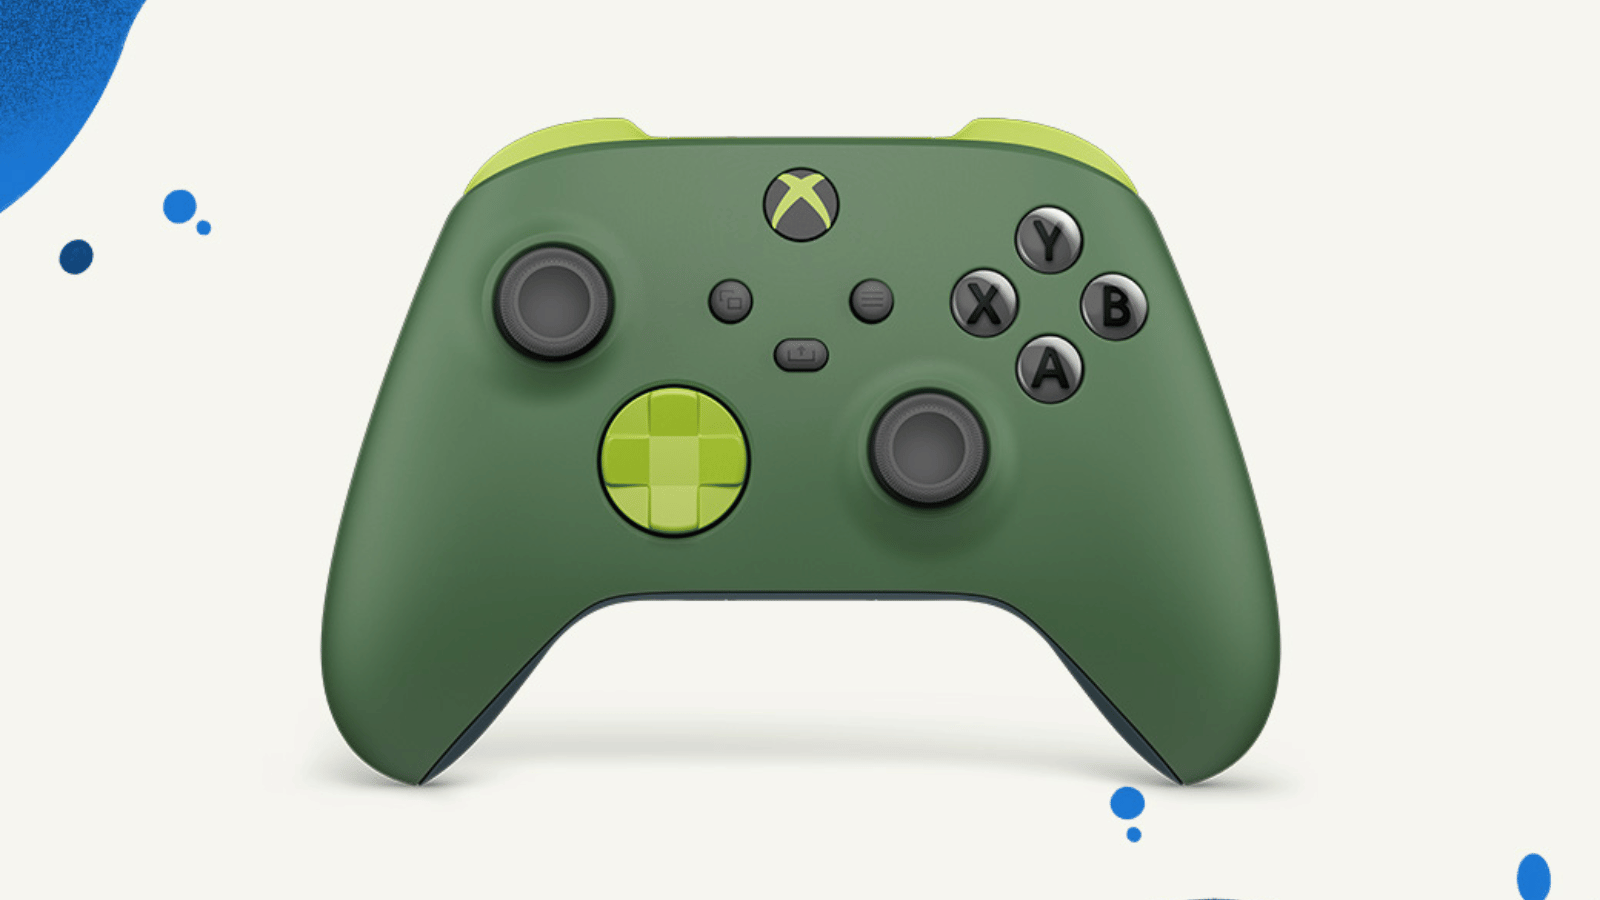 Xbox Remix Special Edition controller